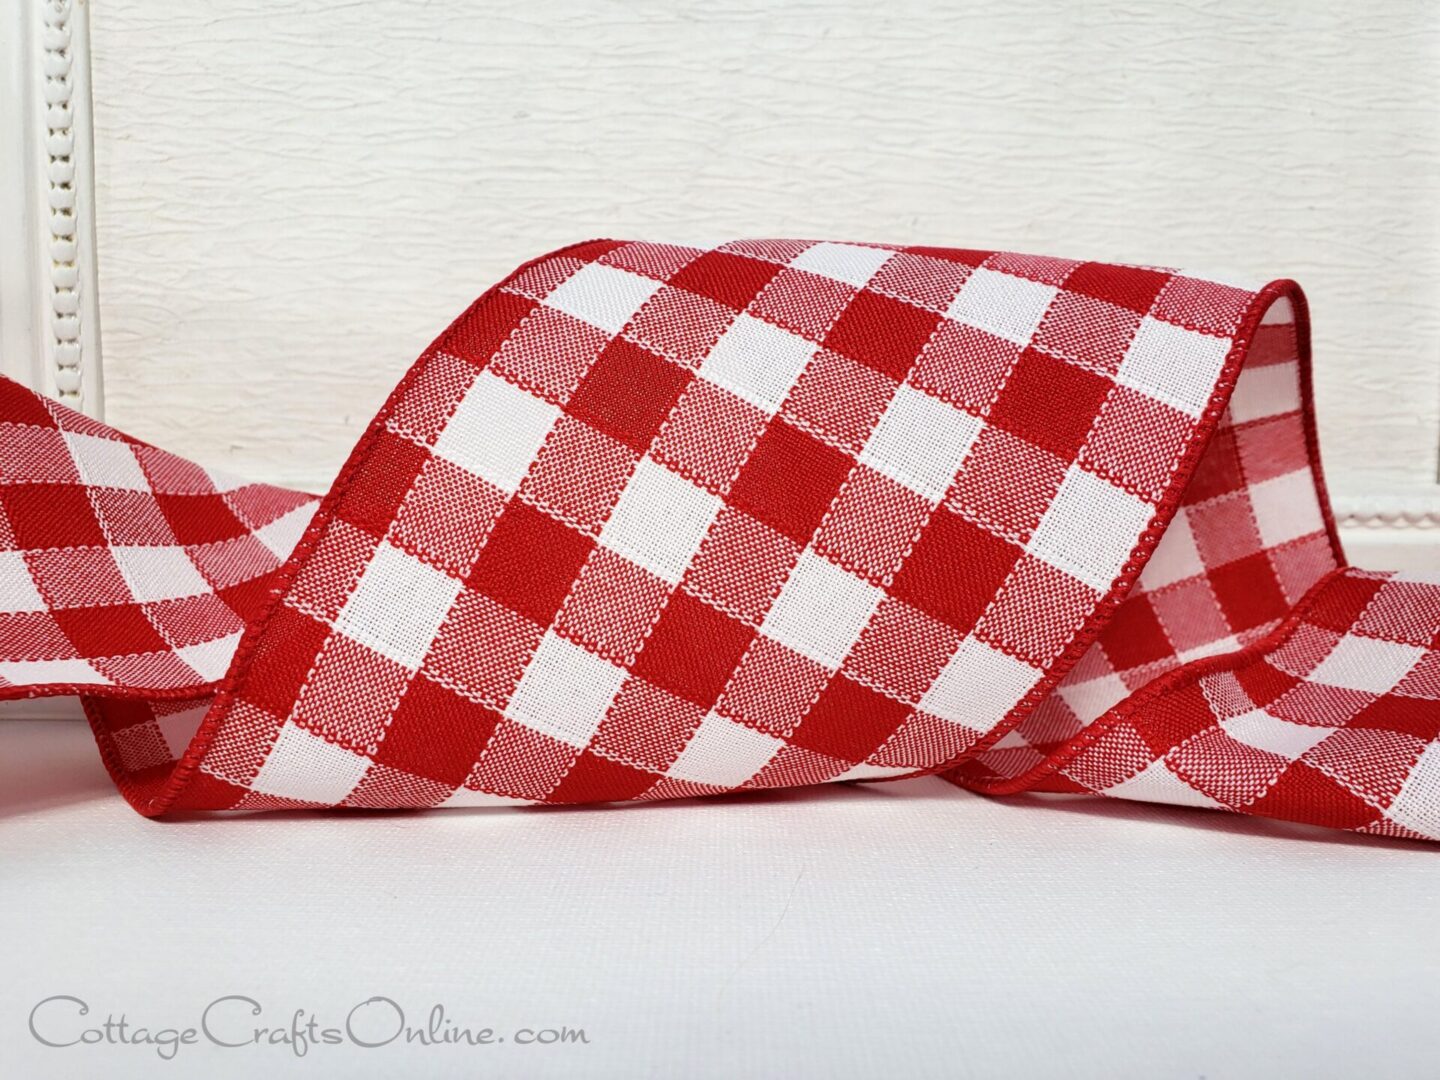 A red and white checkered ribbon on a table.